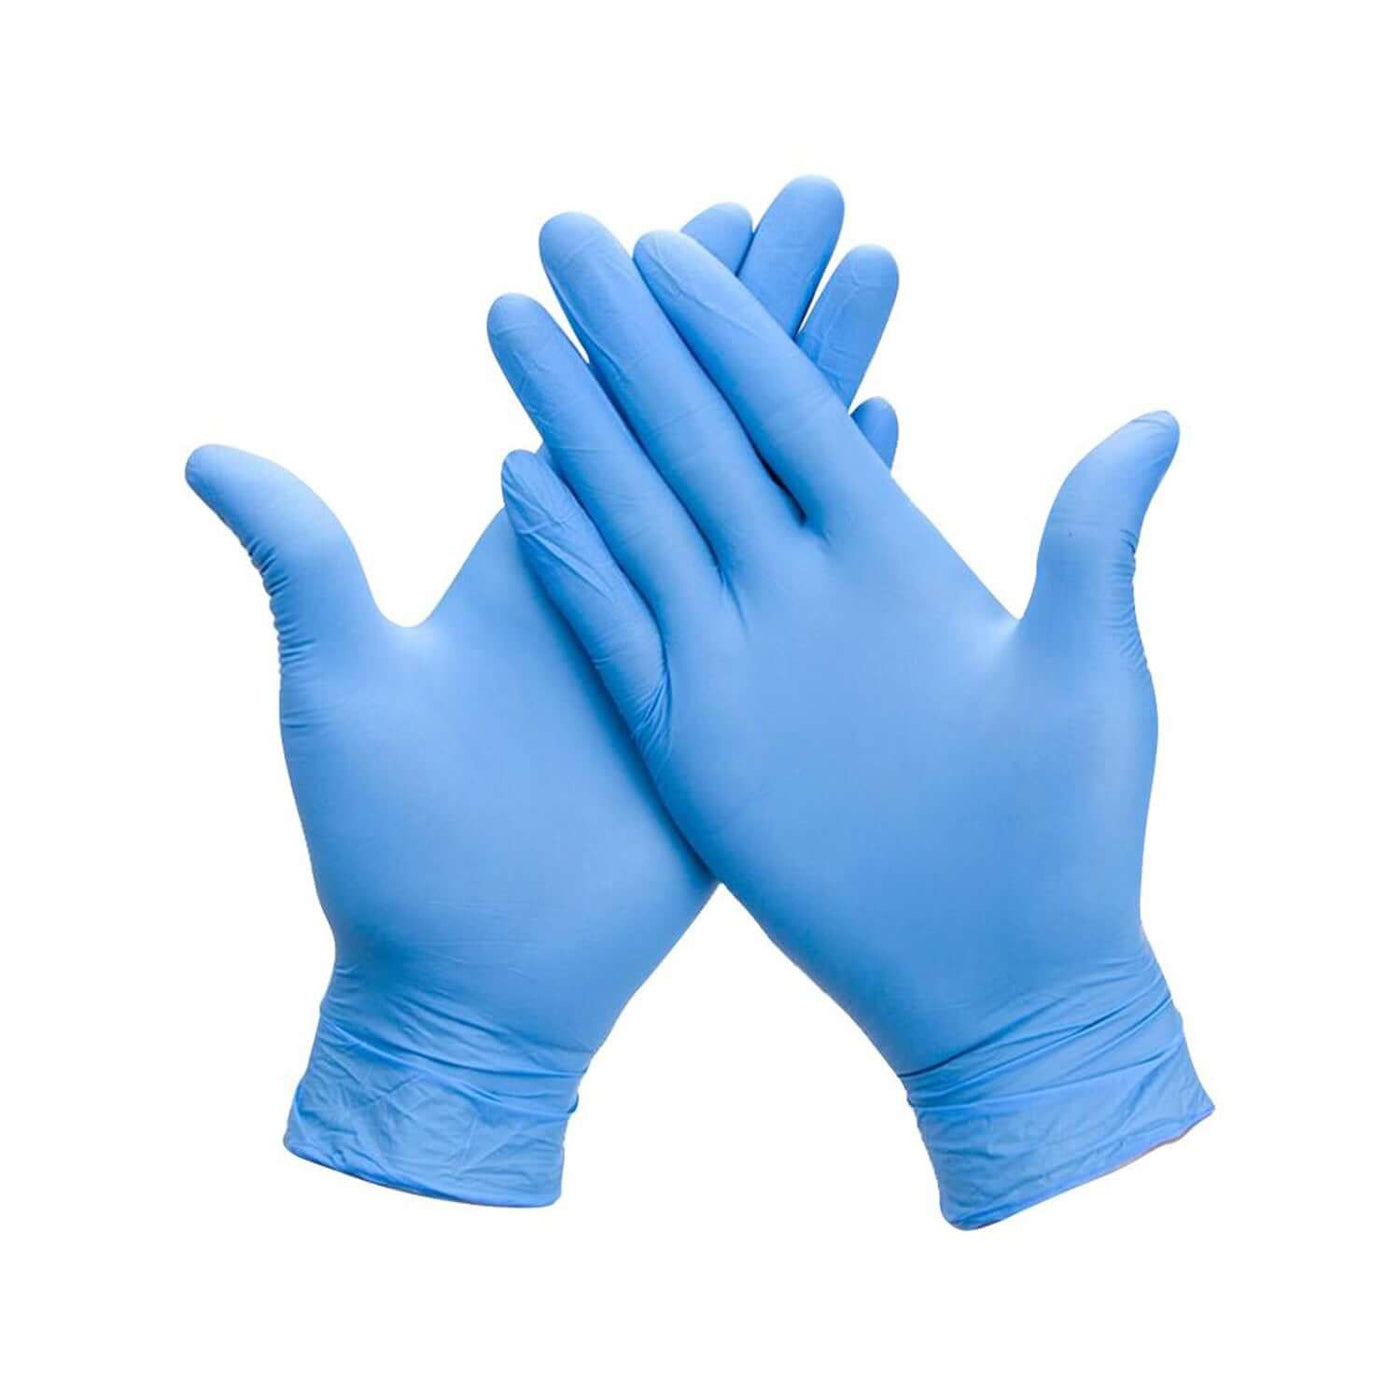 Blue Nitrile Gloves, Pack of 100, CE & EU Certified, Powder & Latex Free, Heavy Duty Examination, Medical Grade, Recommended by Professionals (6838750576739)